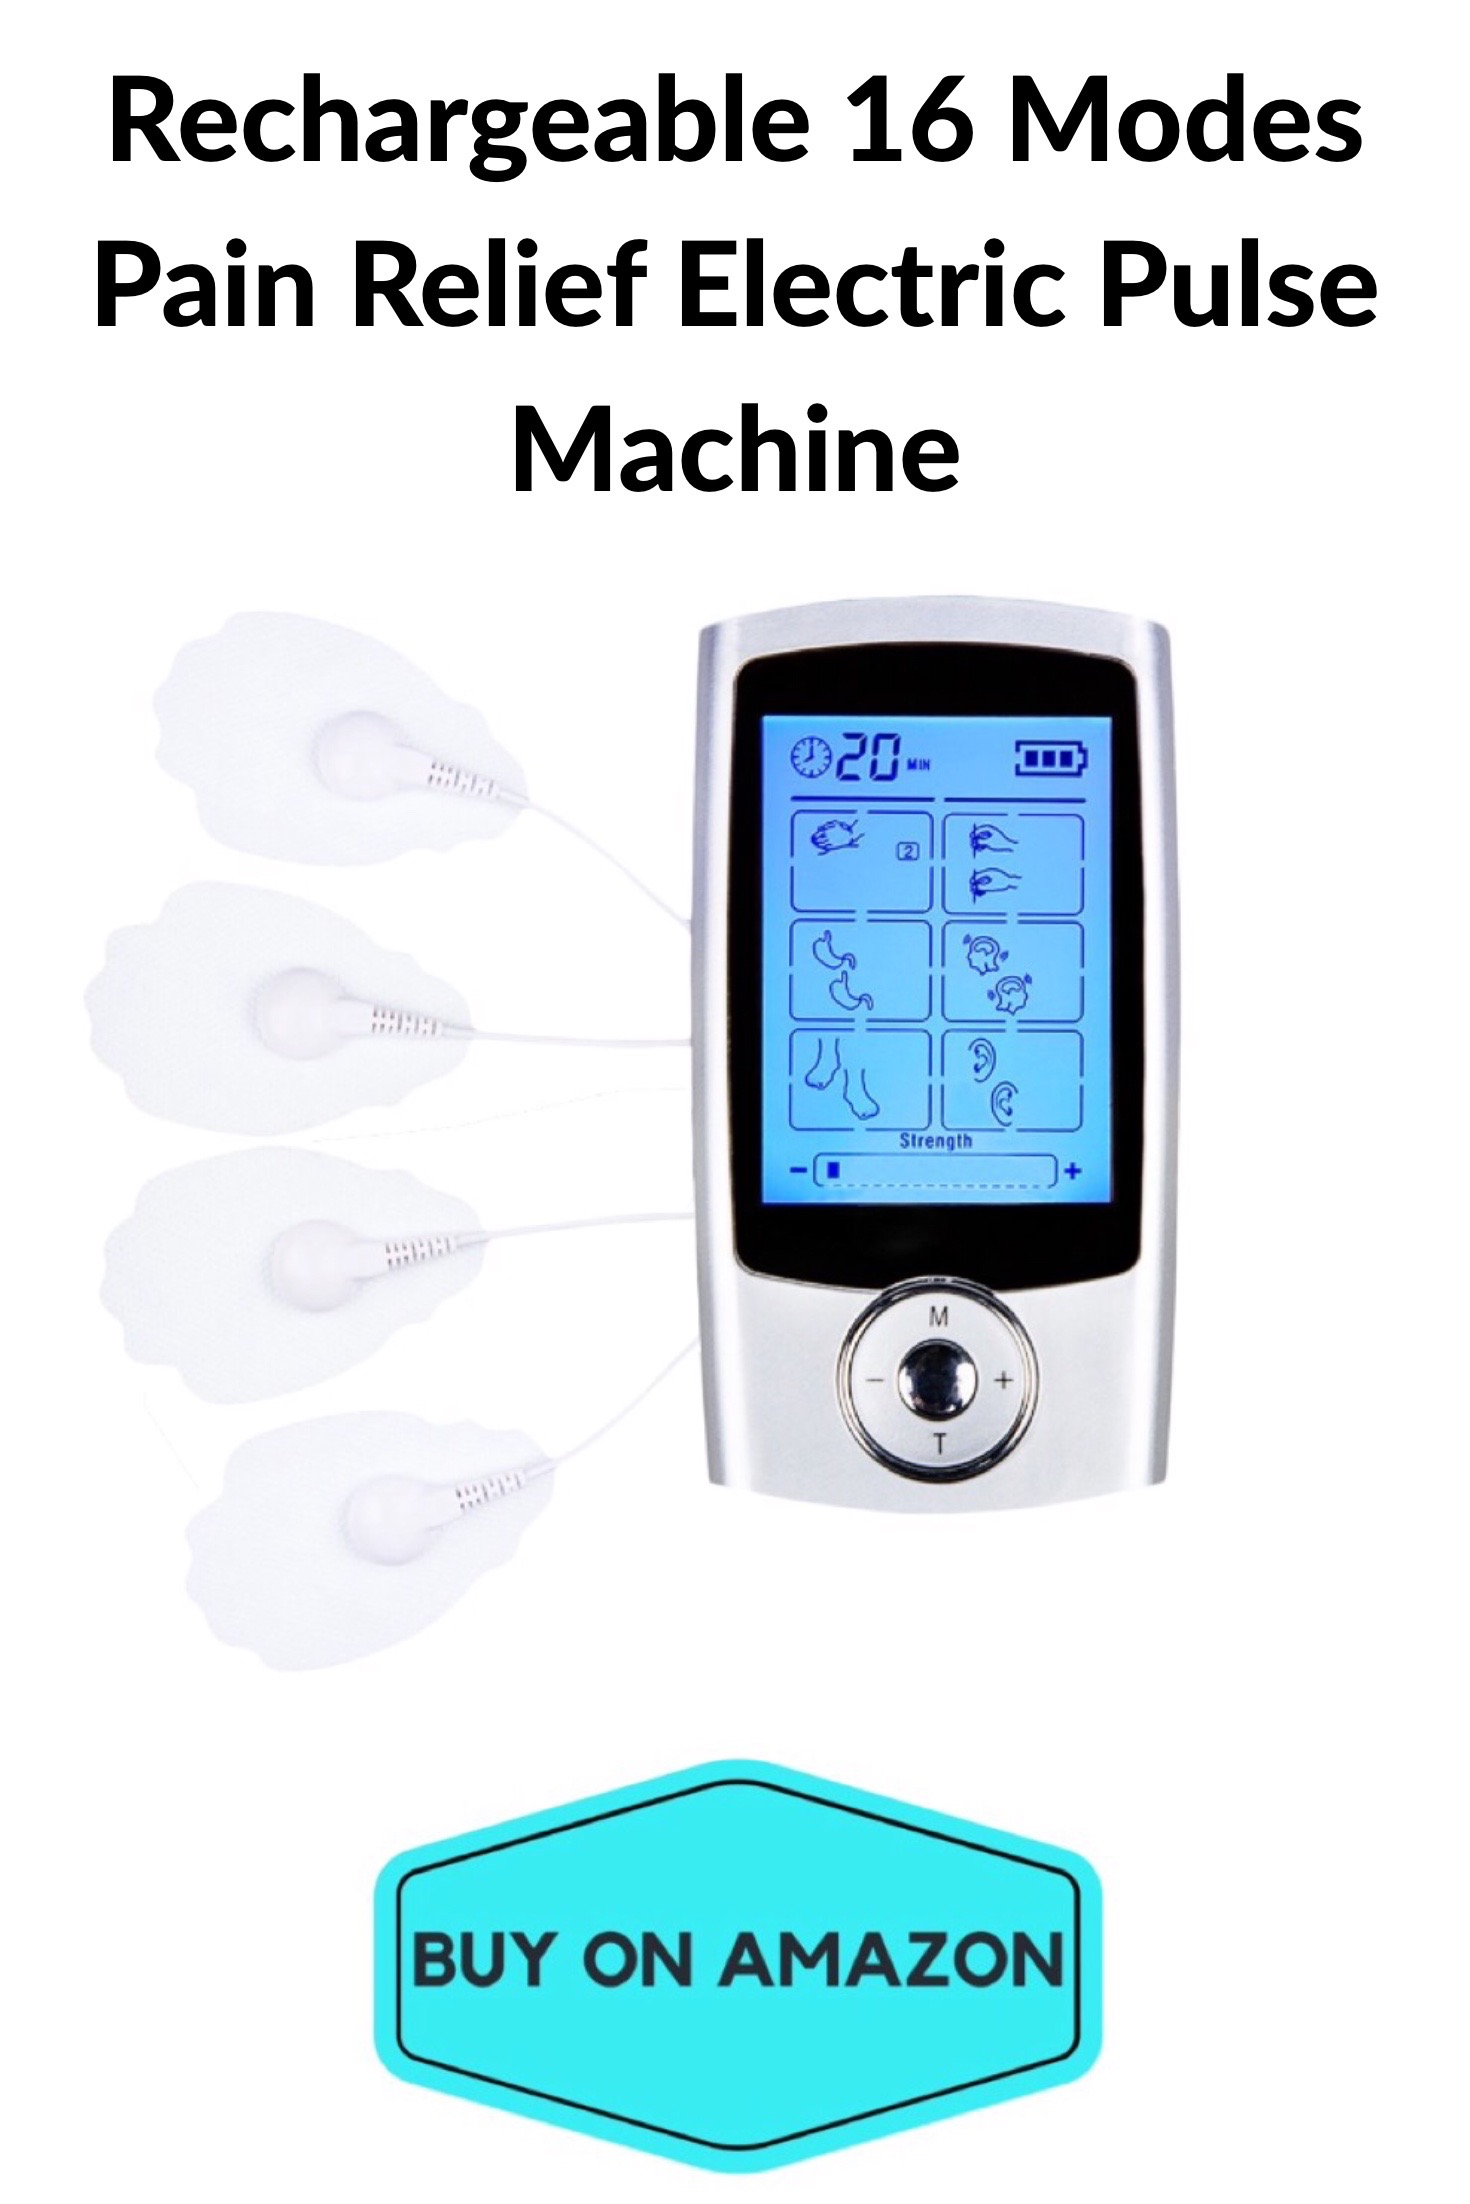 Rechargeable 16 Modes Pain Relief Electric Pulse Machine